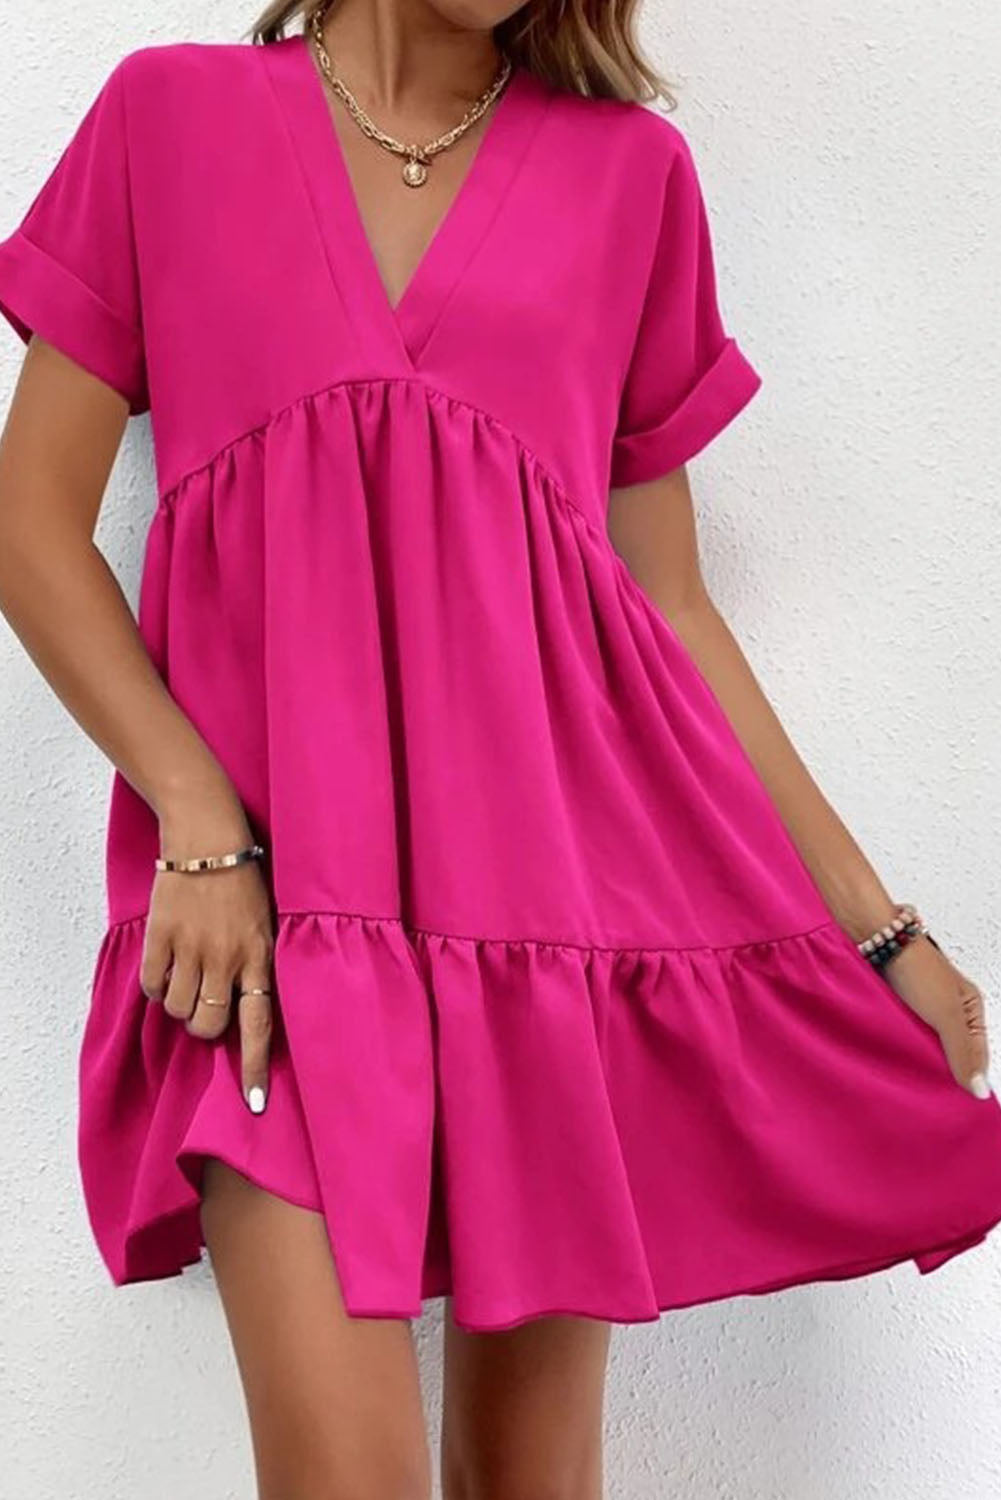 Rose Fresh and sweet V-neck solid color large swing casual skirt dress